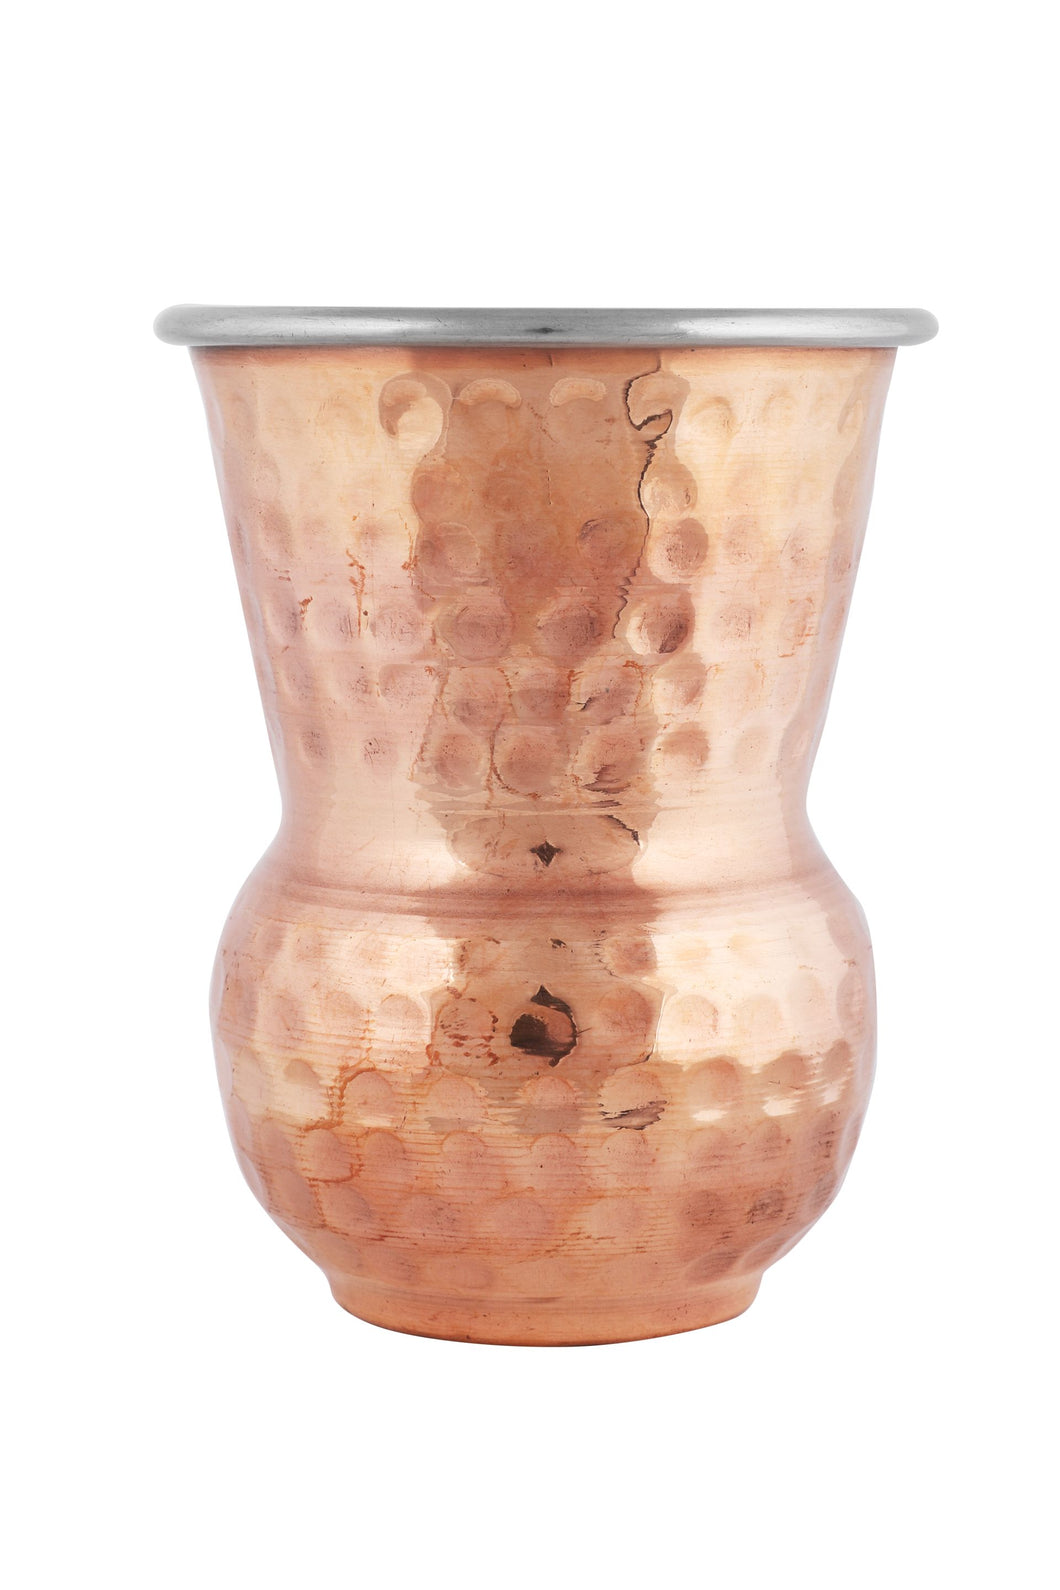 Copper Stainless Steel Hammered Mughlai Glass - 350 ML, Double Wall